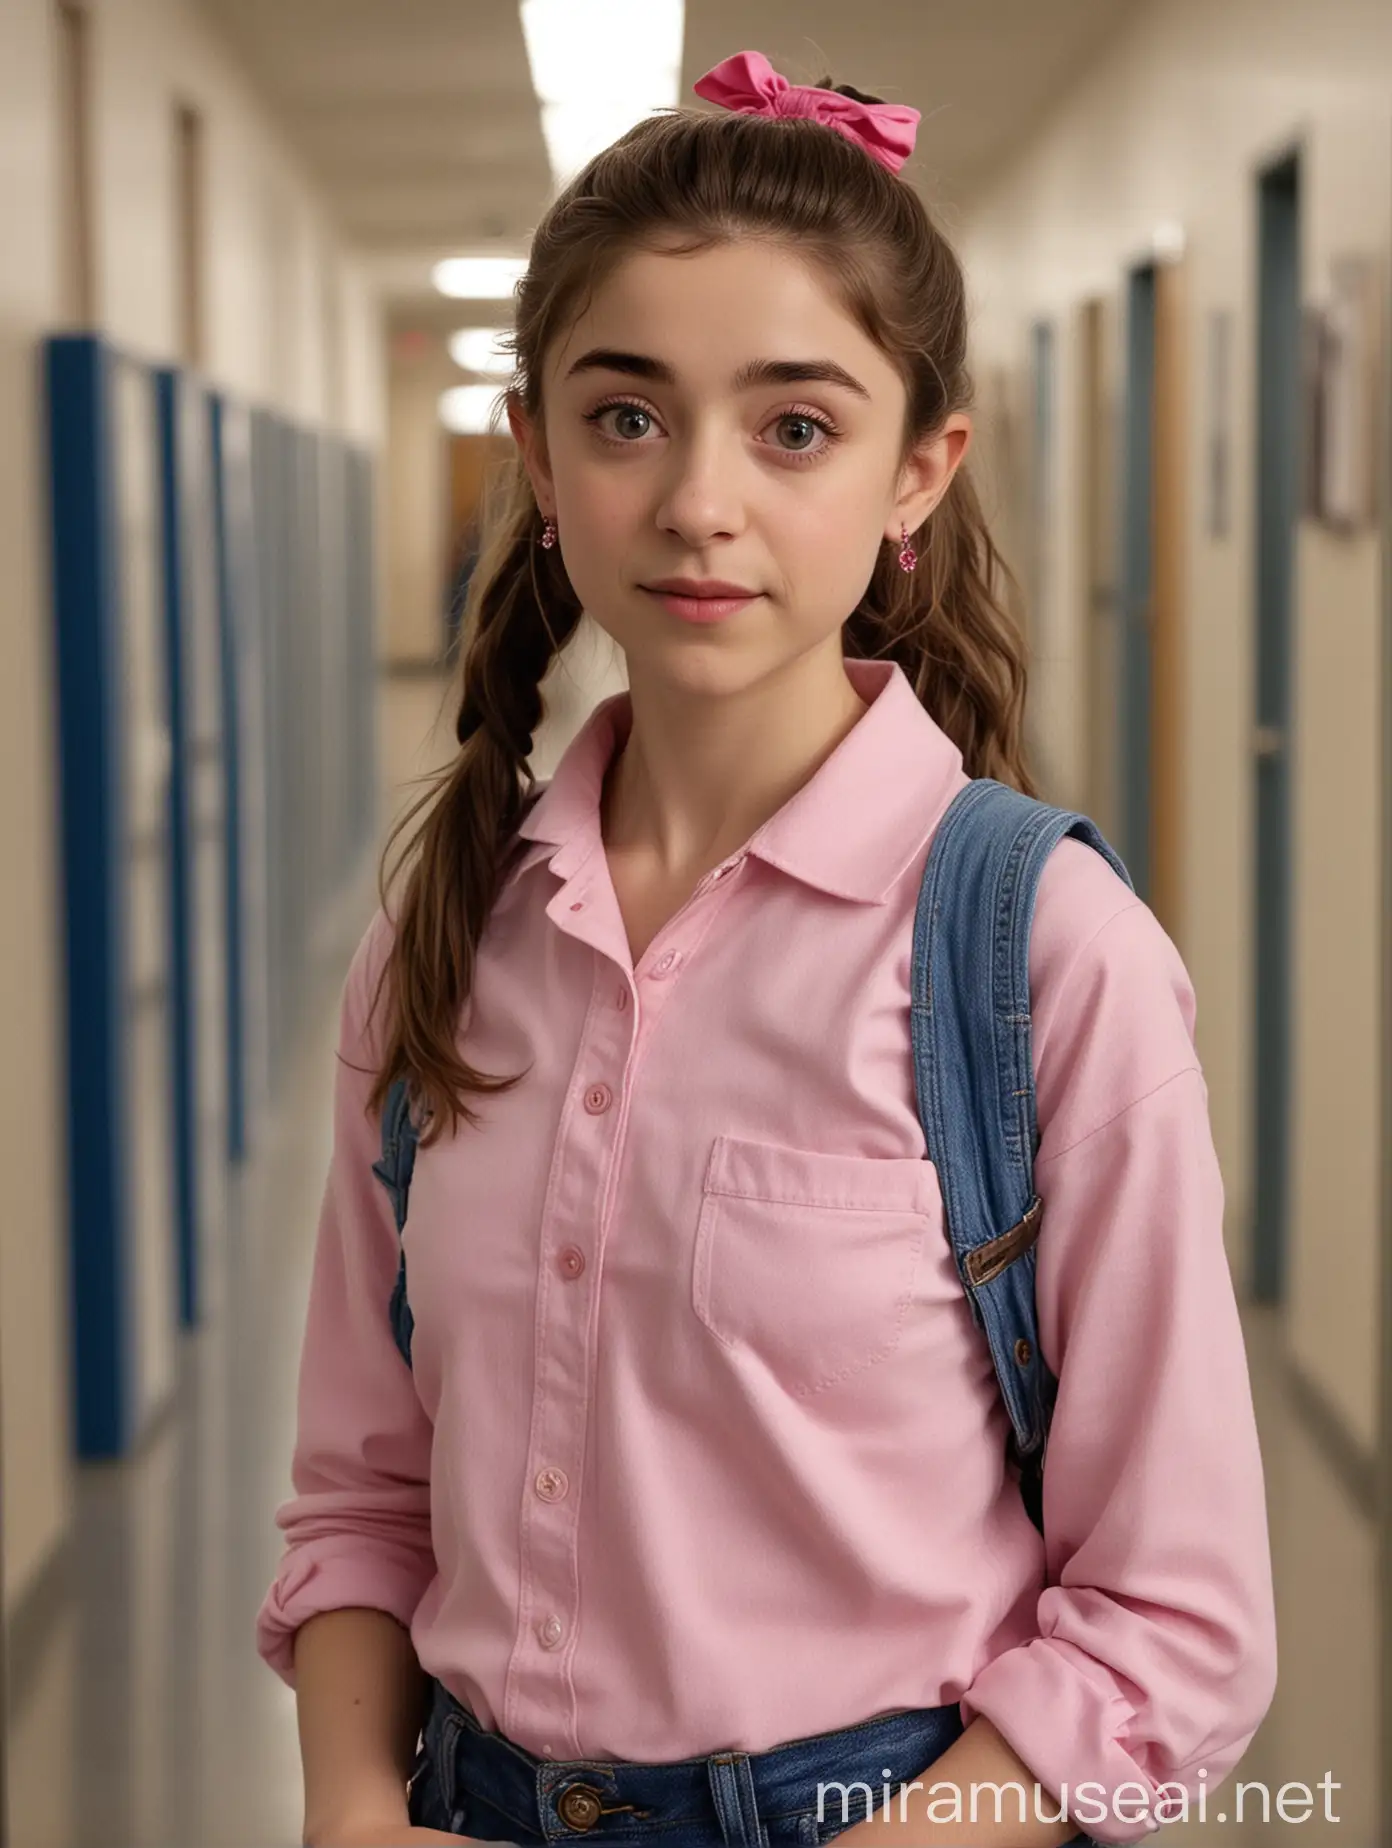 University Student Natalia Dyer with Pink Scrunchie and Textbooks